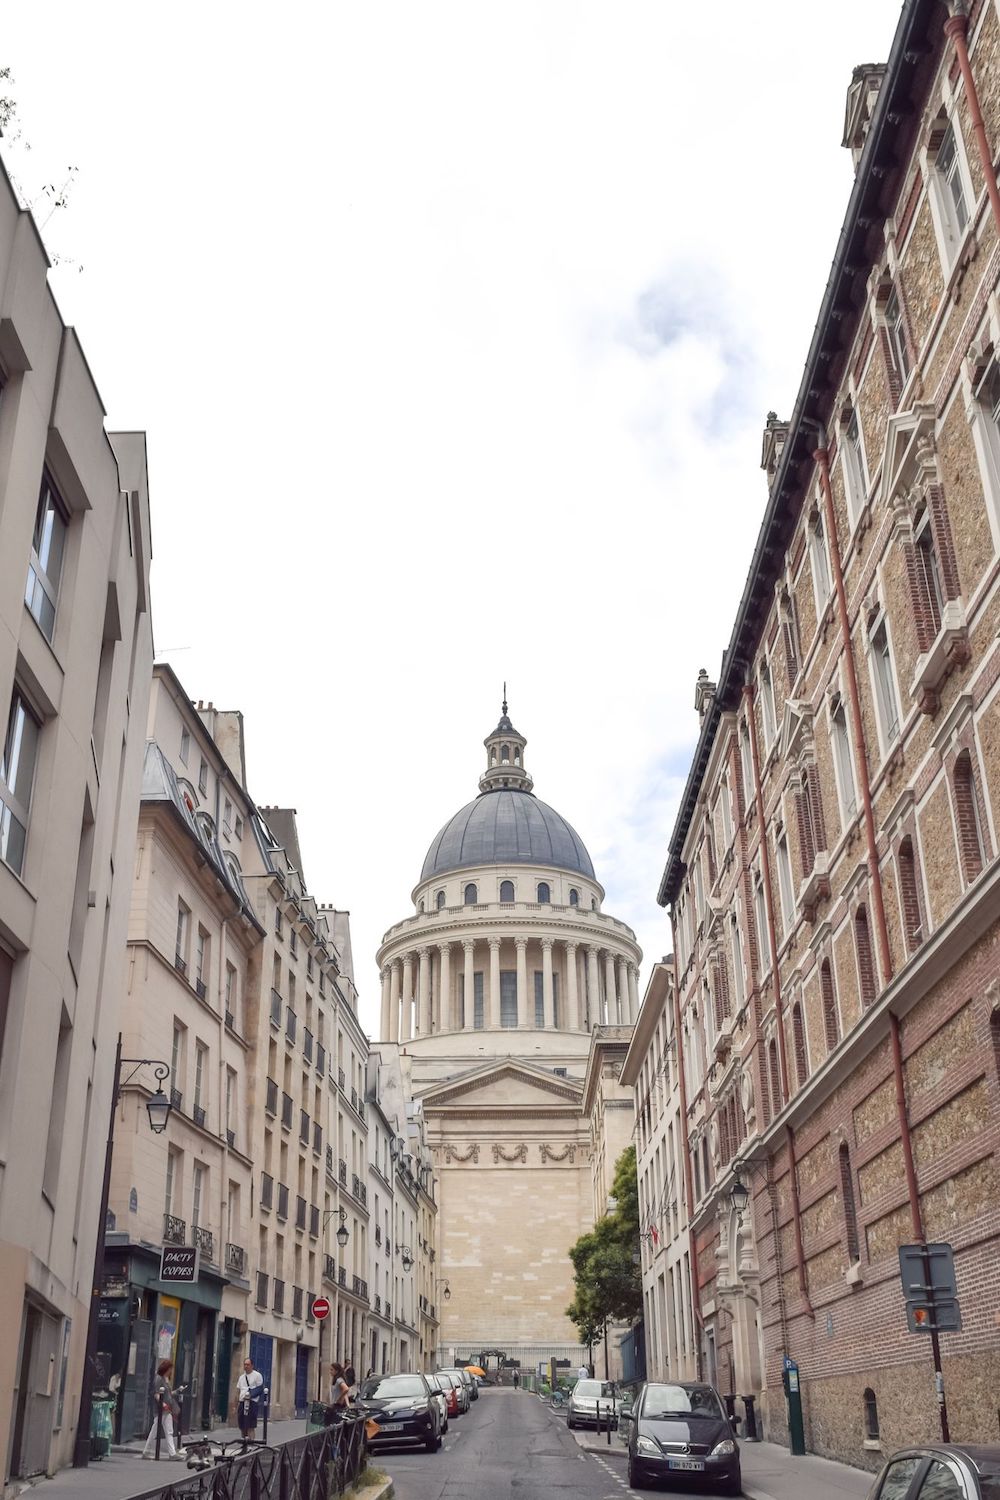 View of the Panthéon from Rue Valette